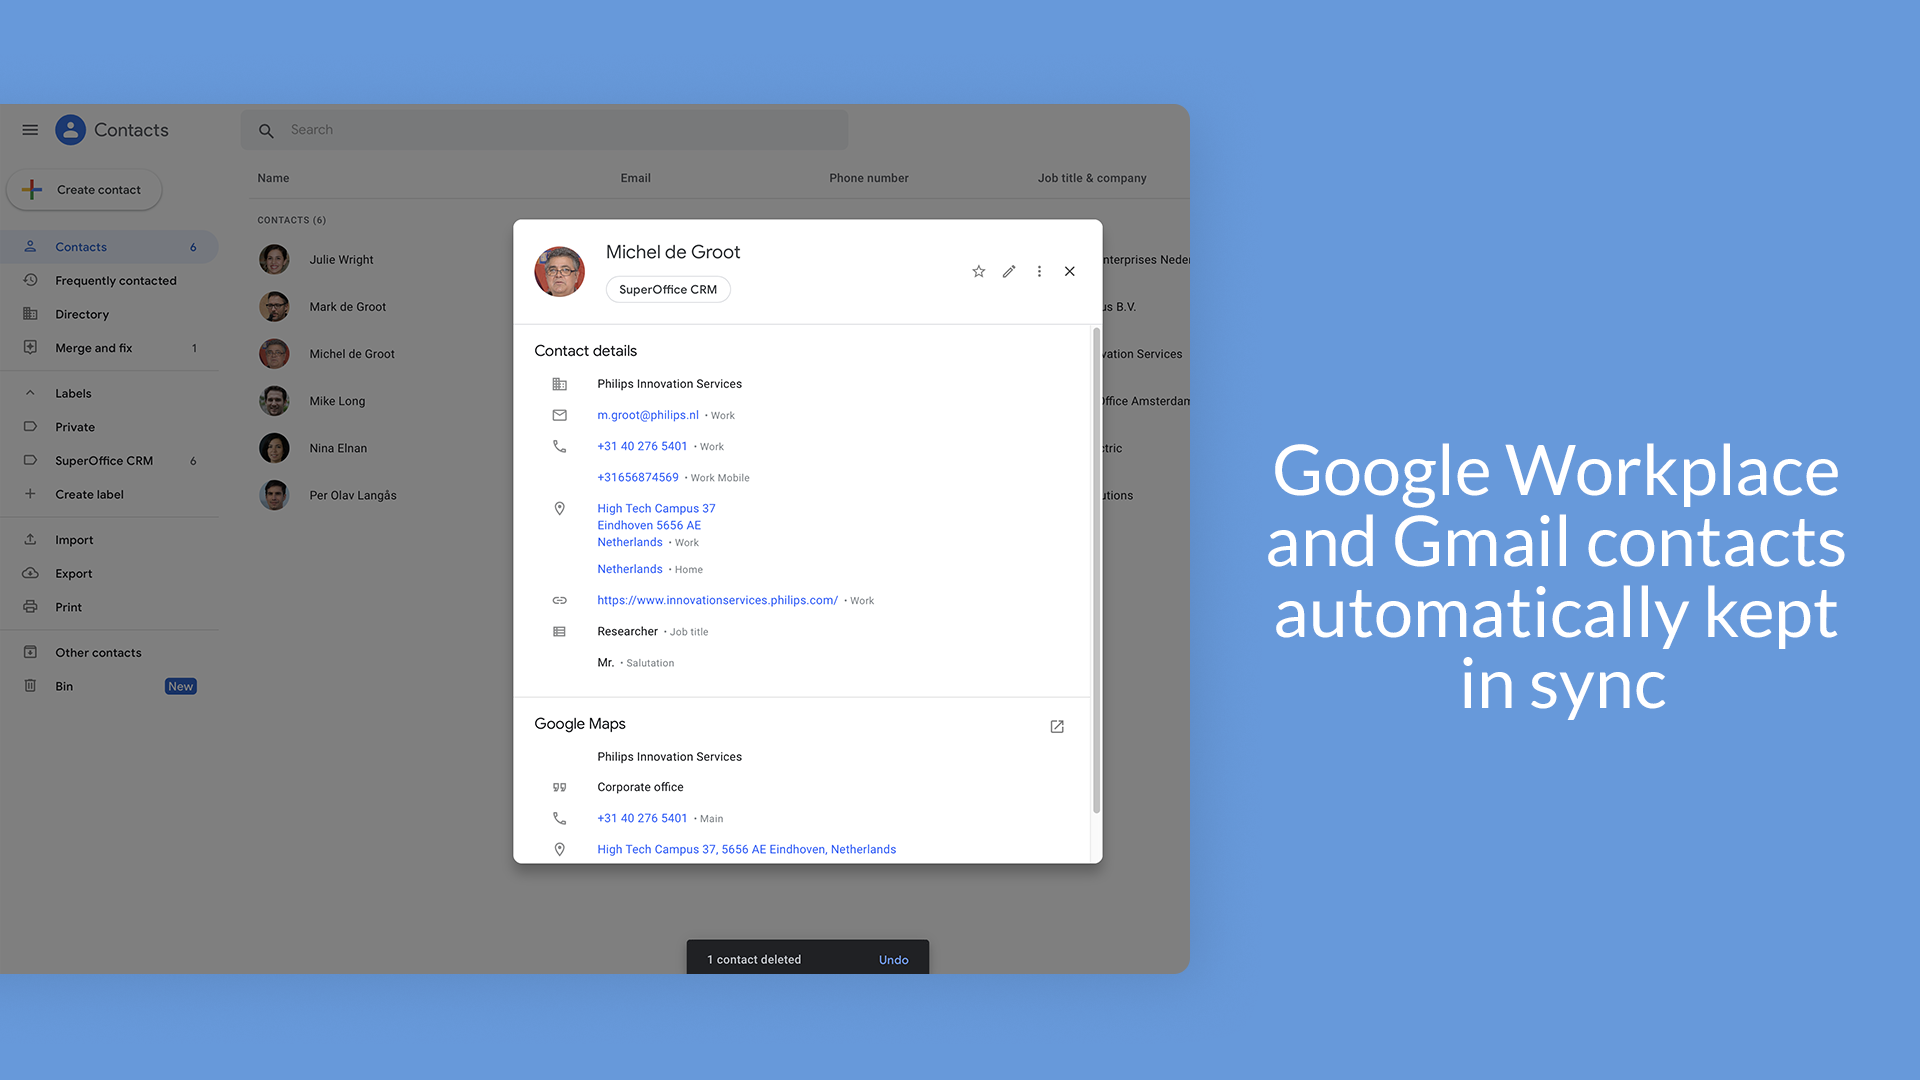 Google Workplace and Gmail contacts automatically kept in sync